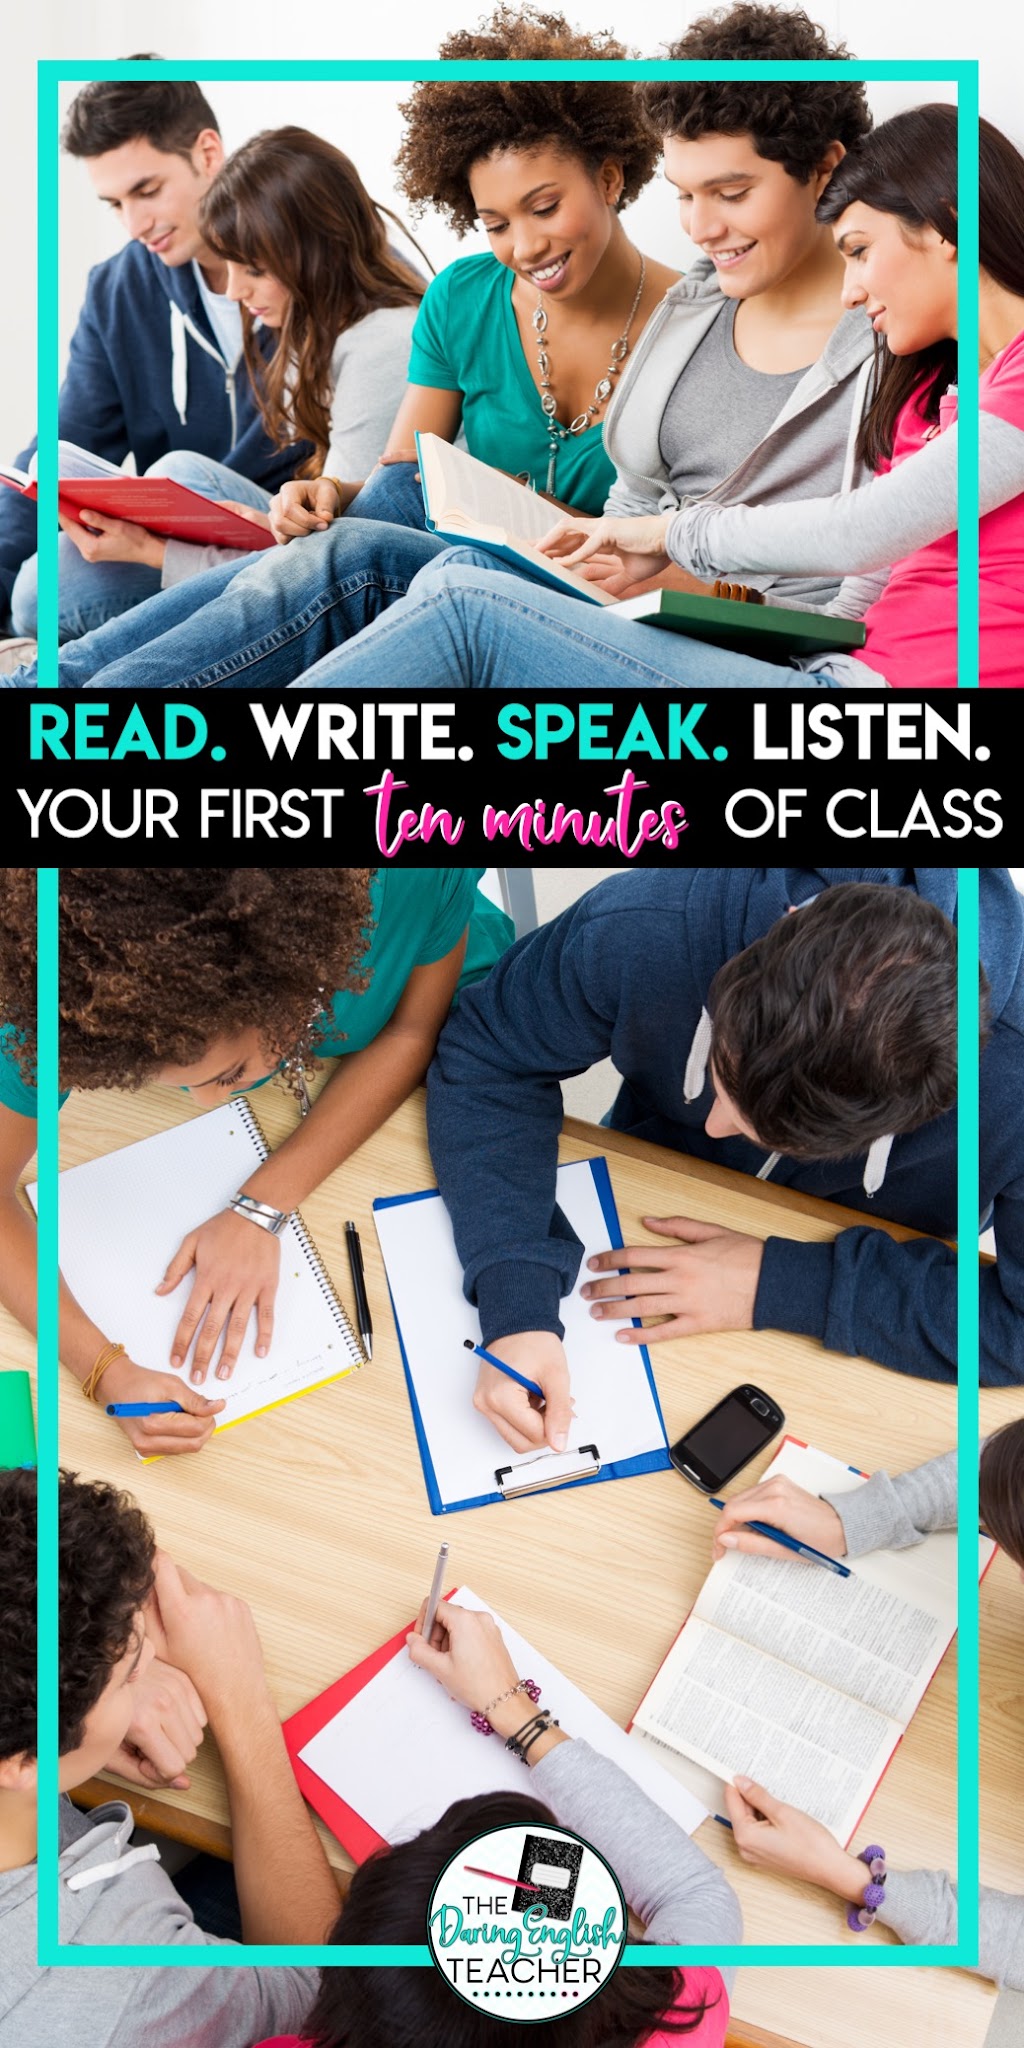 Read. Write. Speak. Listen. Engage Your Students in the First Ten Minutes